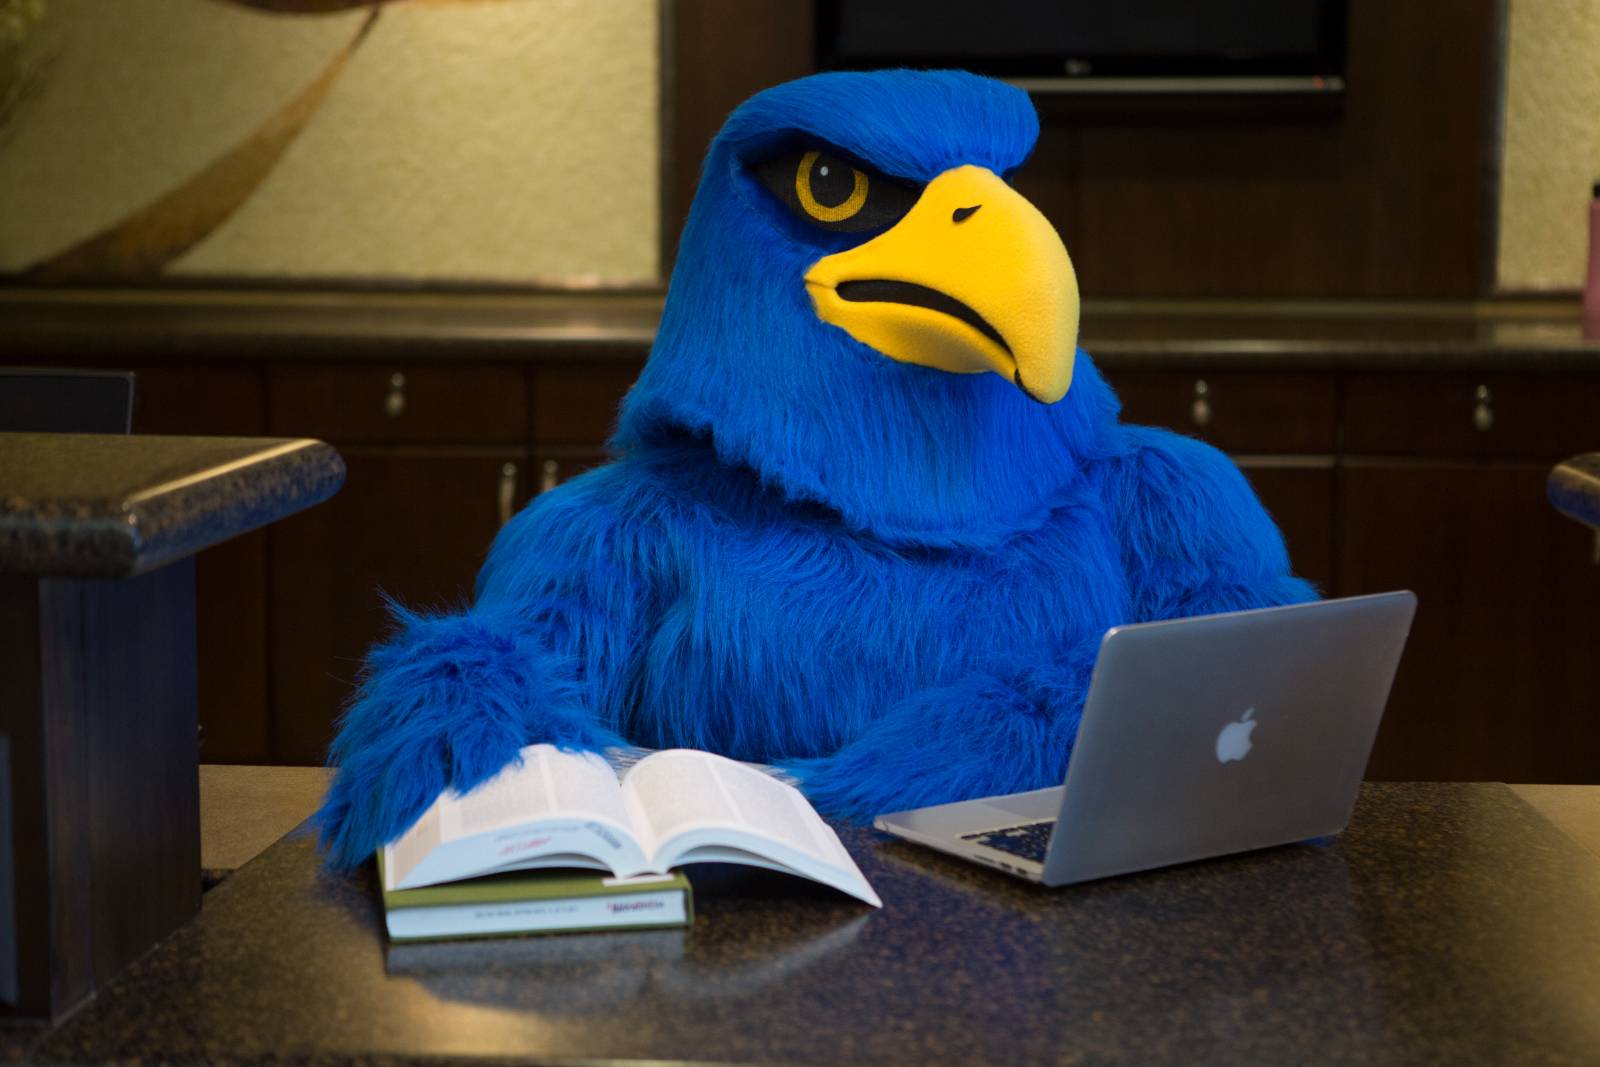 Freddie Falcon at desk with laptop